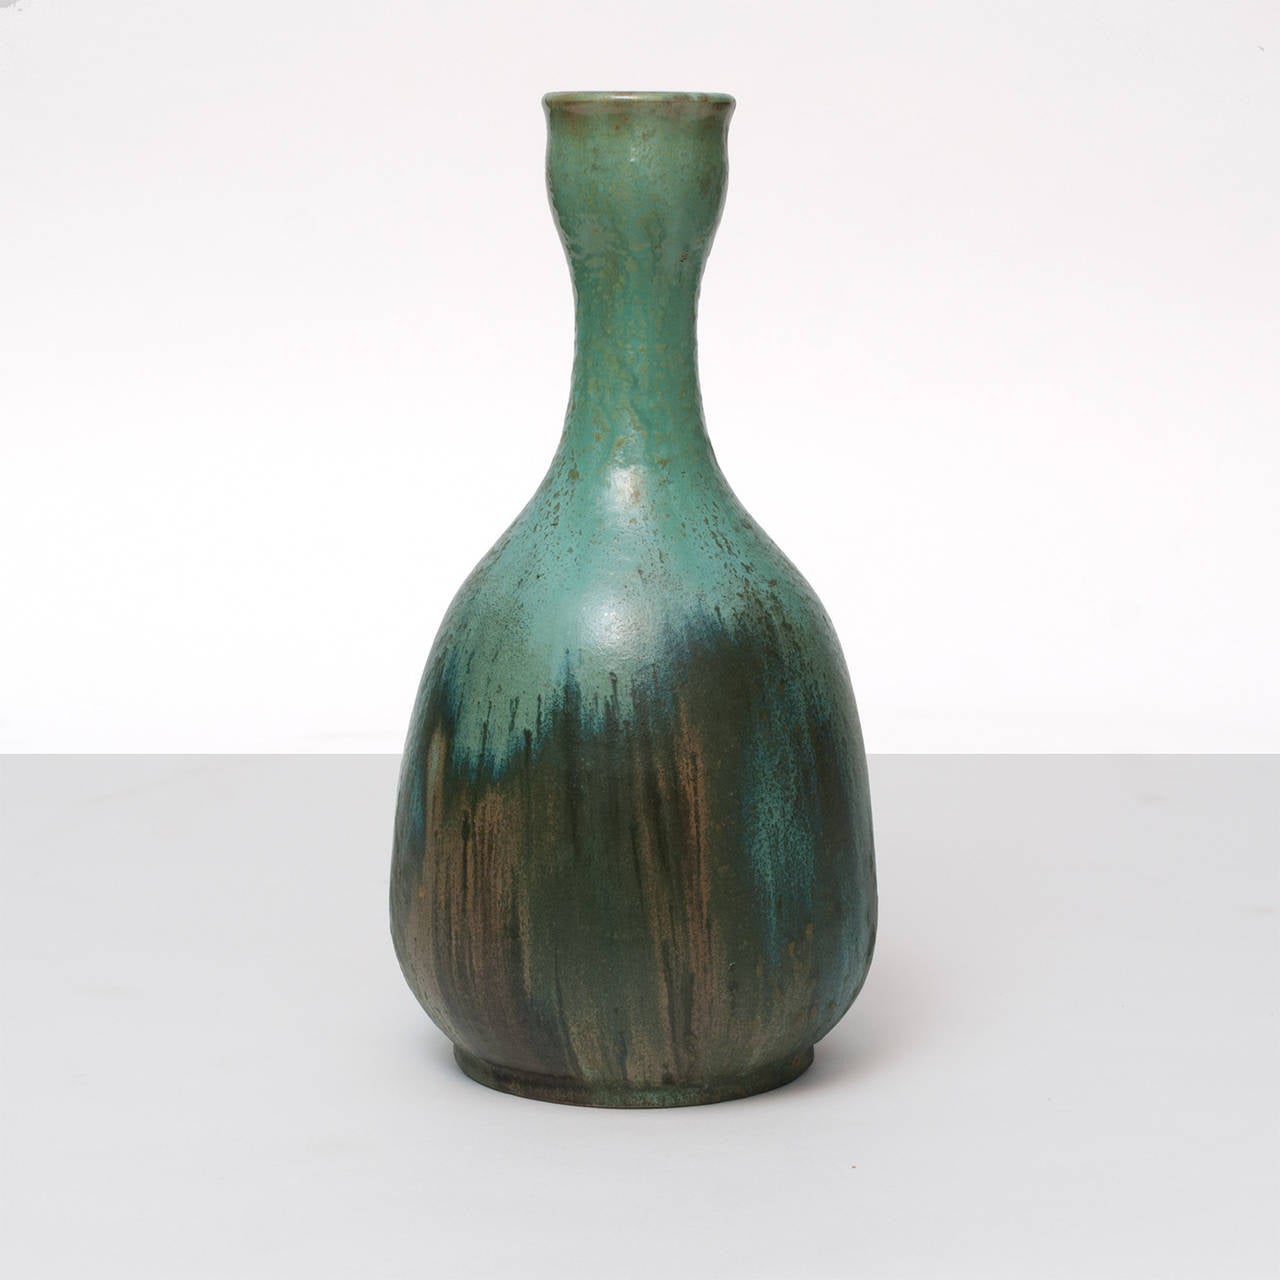 Swedish Art Deco Ceramic Vase with Green and Brown Glazes from Bo Fajans (Art déco)